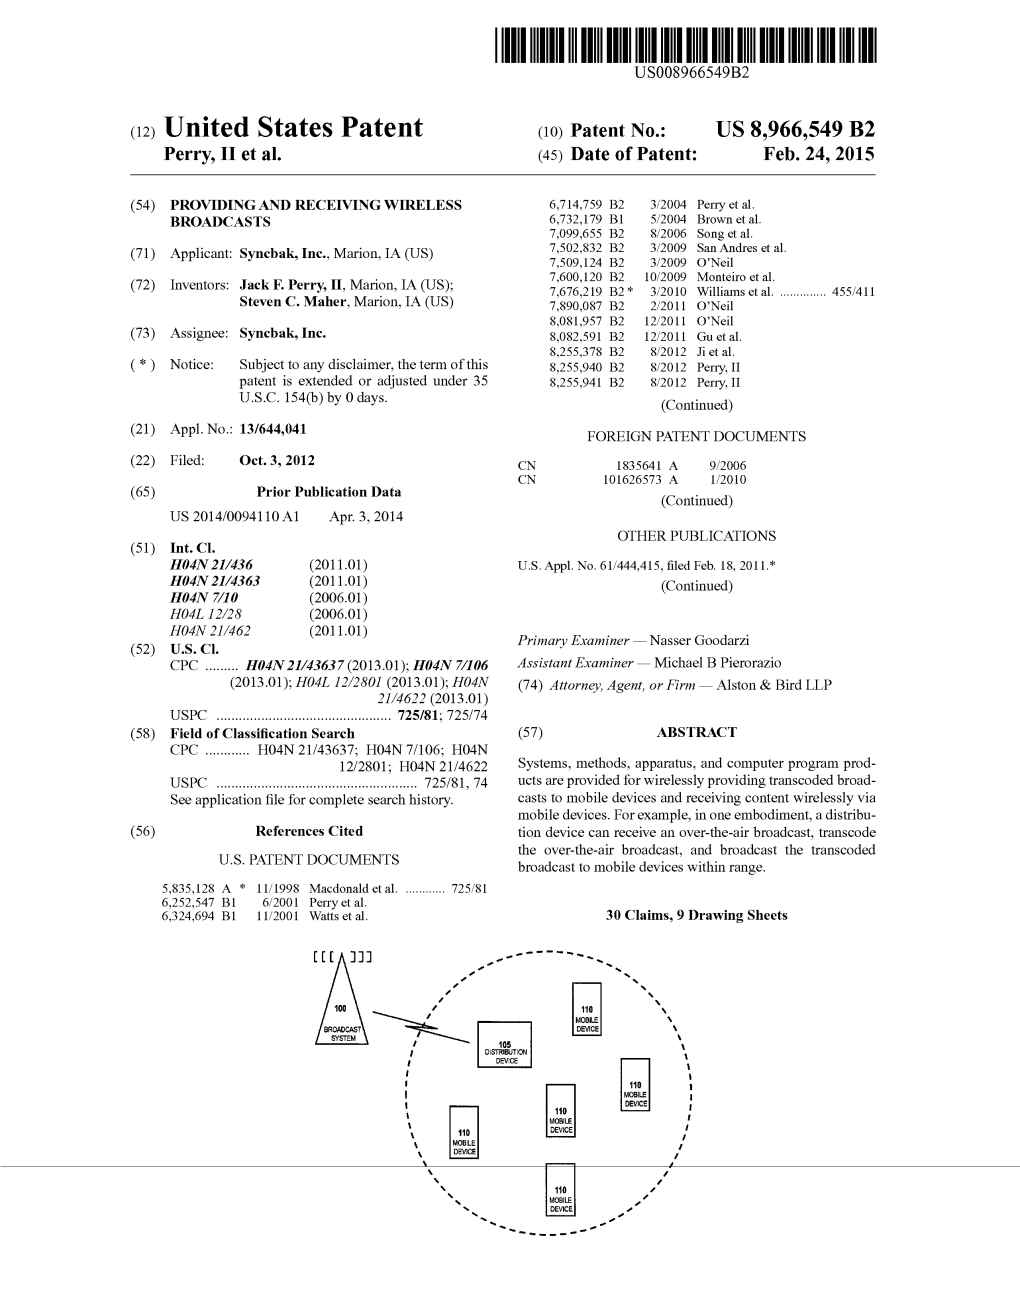 (12) United States Patent (10) Patent N0.: US 8,966,549 B2 Perry, II Et A]